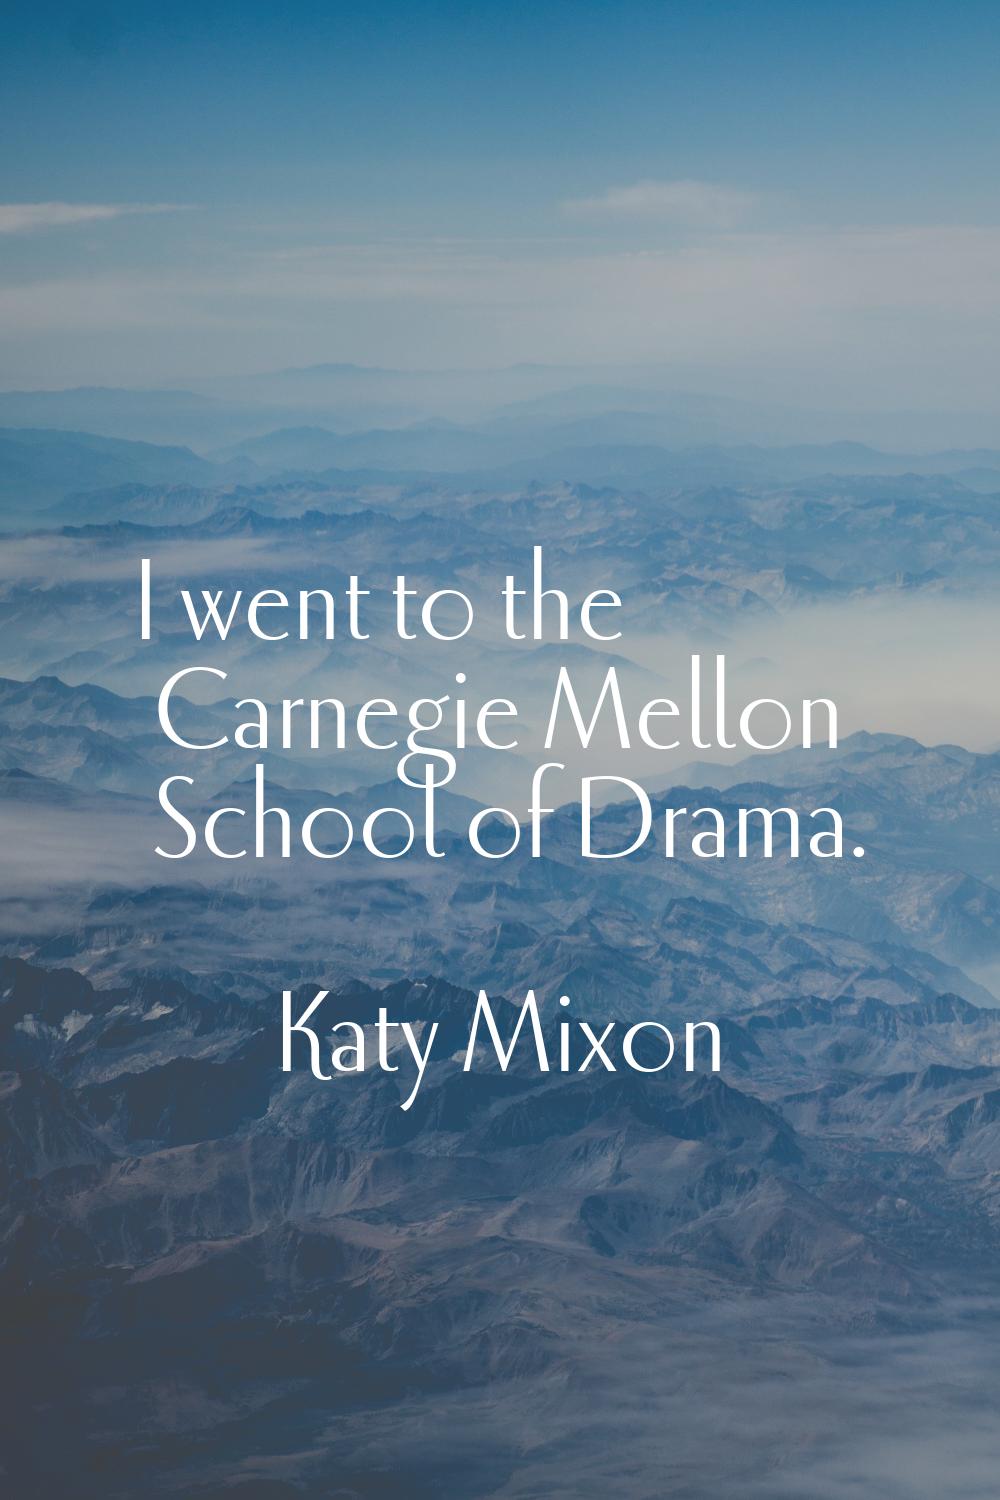 I went to the Carnegie Mellon School of Drama.